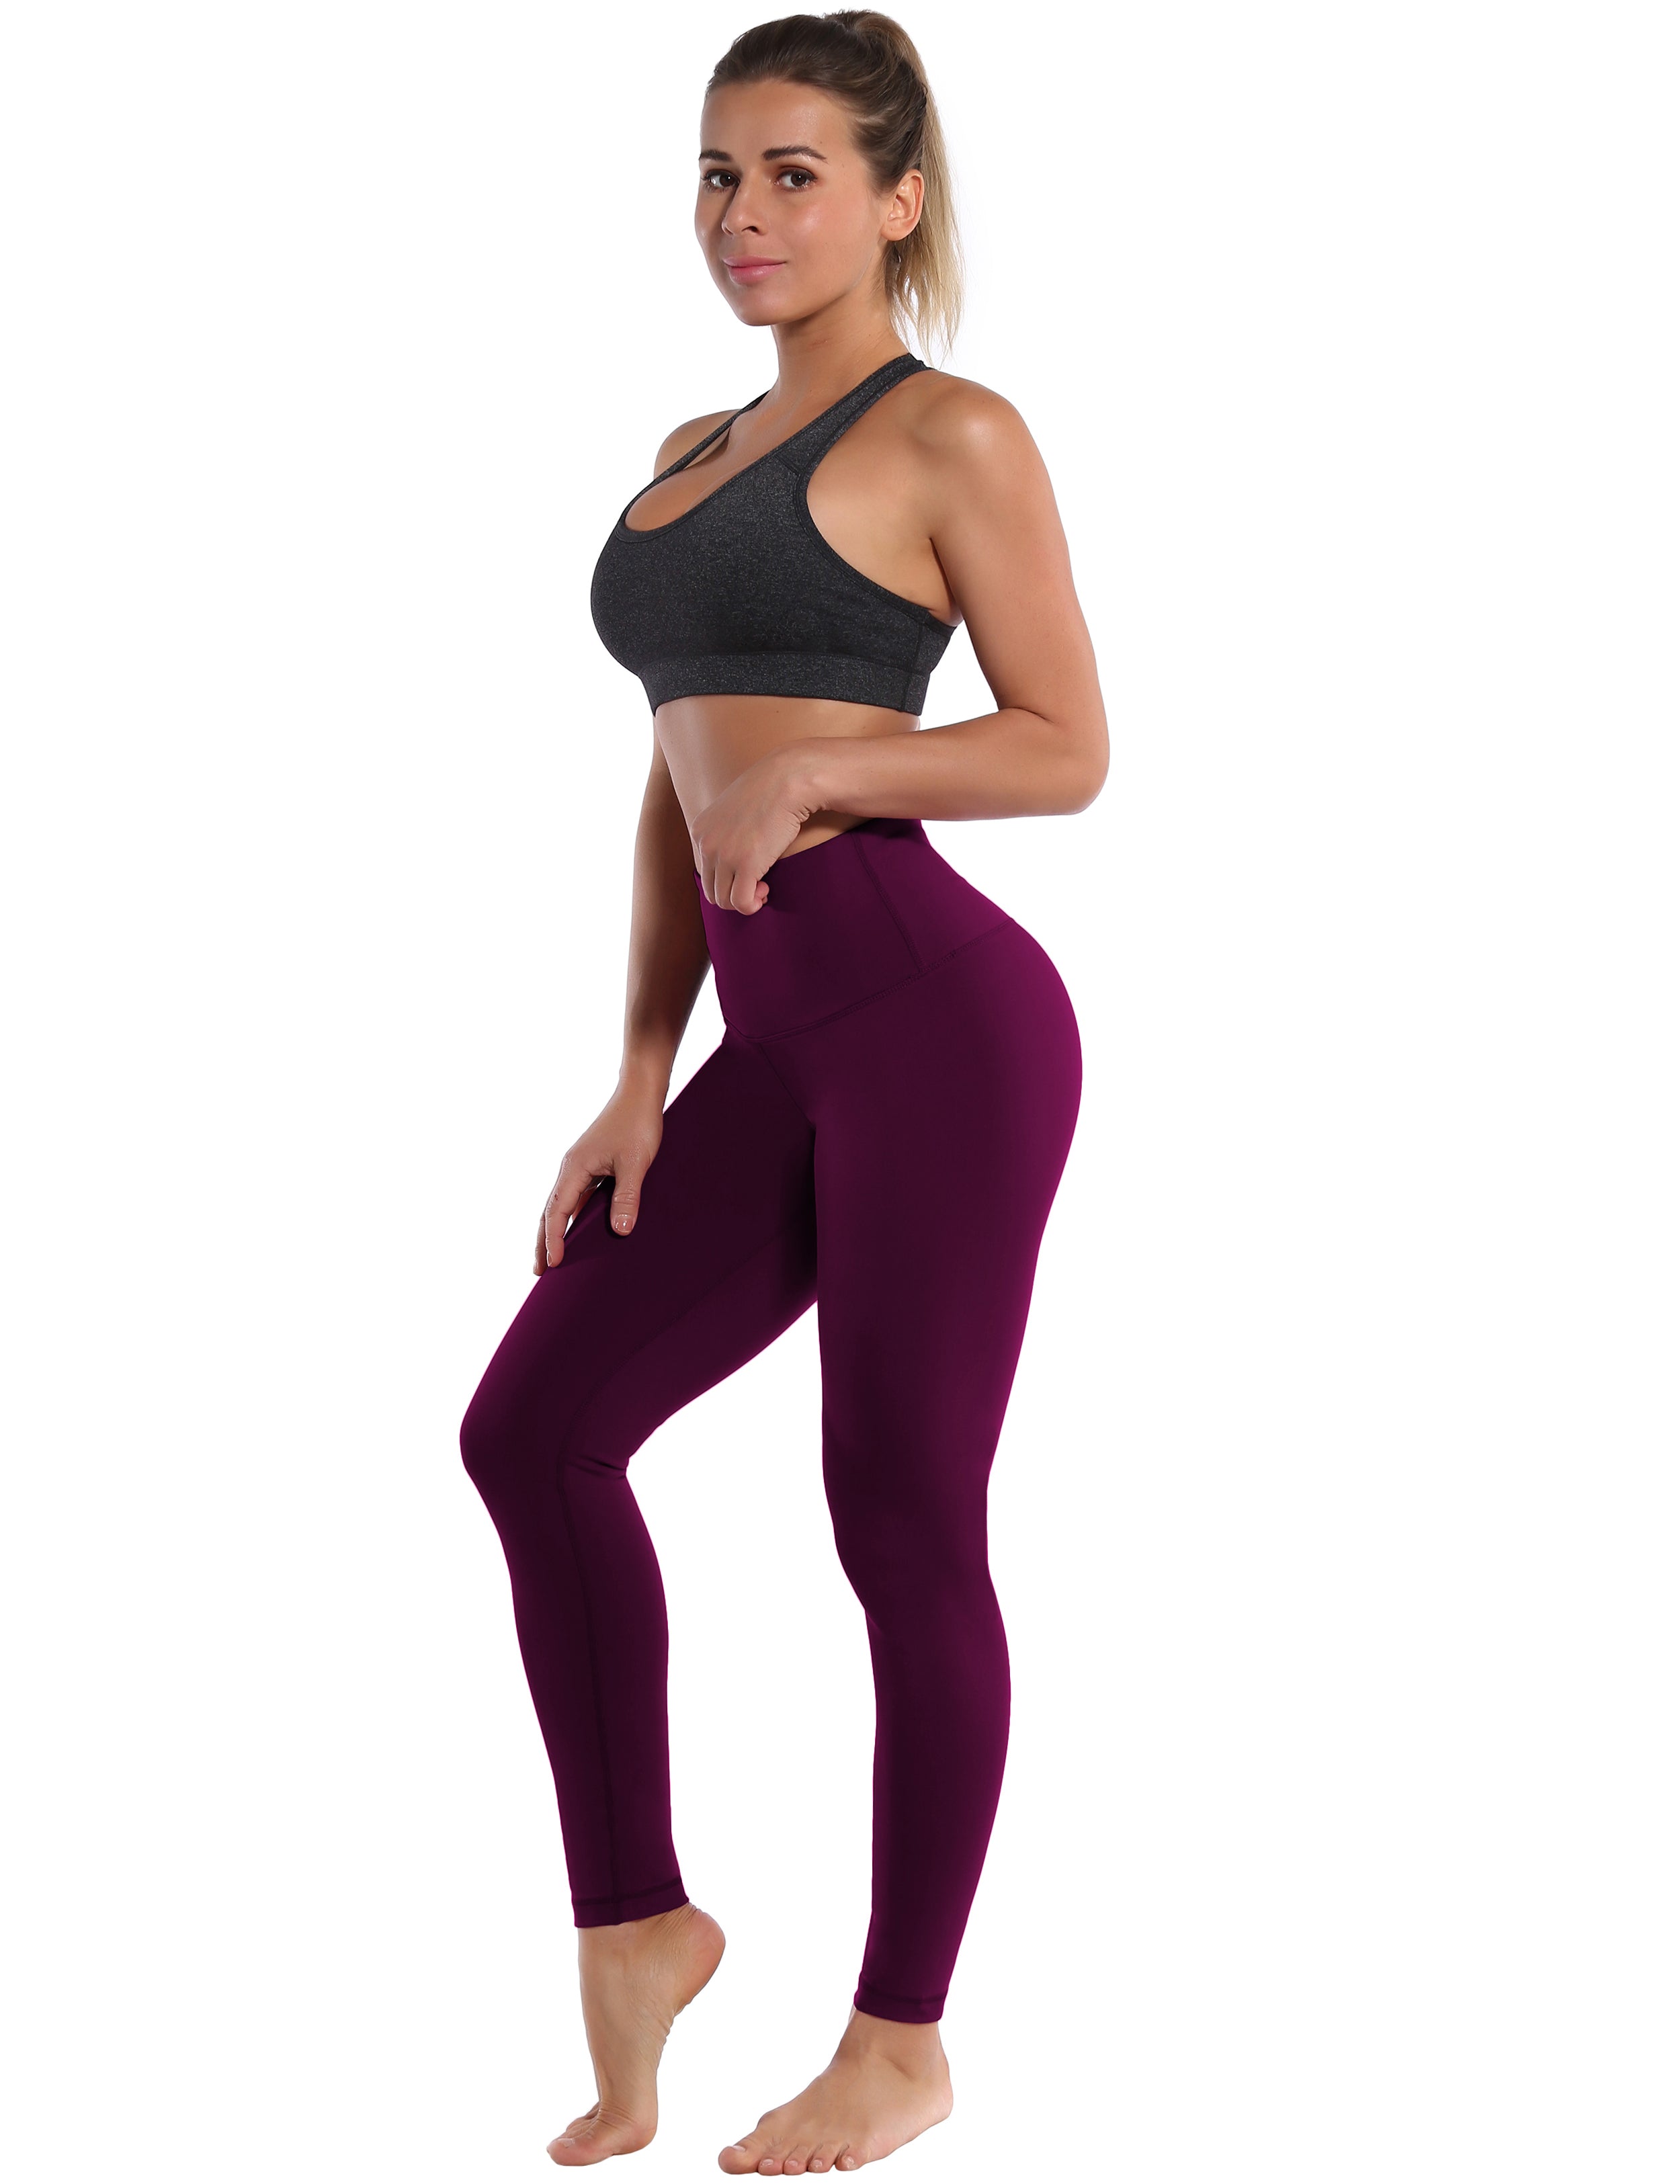 High Waist Yoga Pants grapevine 75%Nylon/25%Spandex Fabric doesn't attract lint easily 4-way stretch No see-through Moisture-wicking Tummy control Inner pocket Four lengths